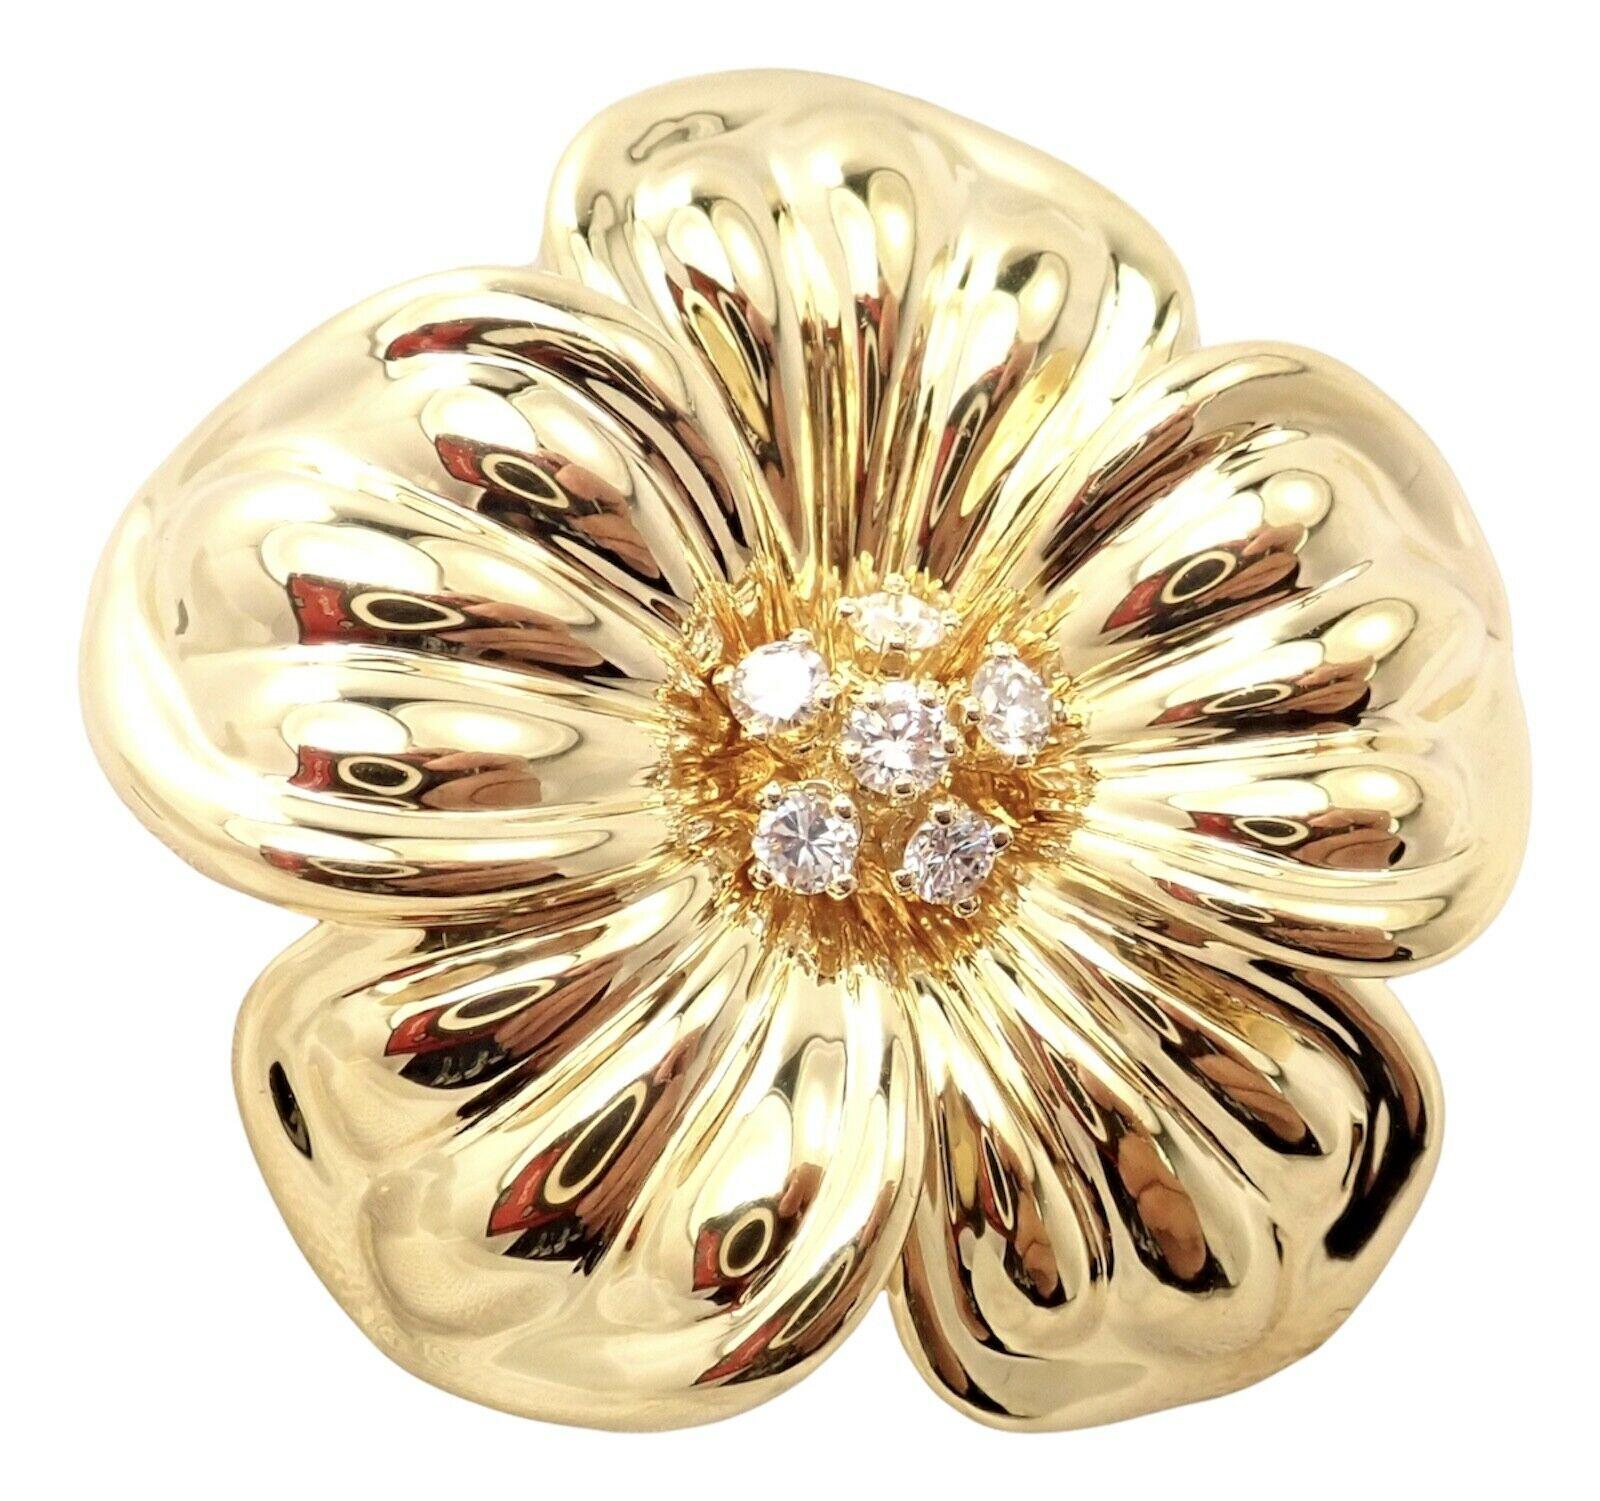 18k Yellow Gold Magnolia Flower Diamond Pin Brooch by Van Cleef & Arpels. 
With 6 round brilliant cut diamonds VVS1 clarity, E color total weight approx. .49ctw
This brooch comes with Van Cleef & Arpels service paper.
Details: 
Measurements: 39mm x